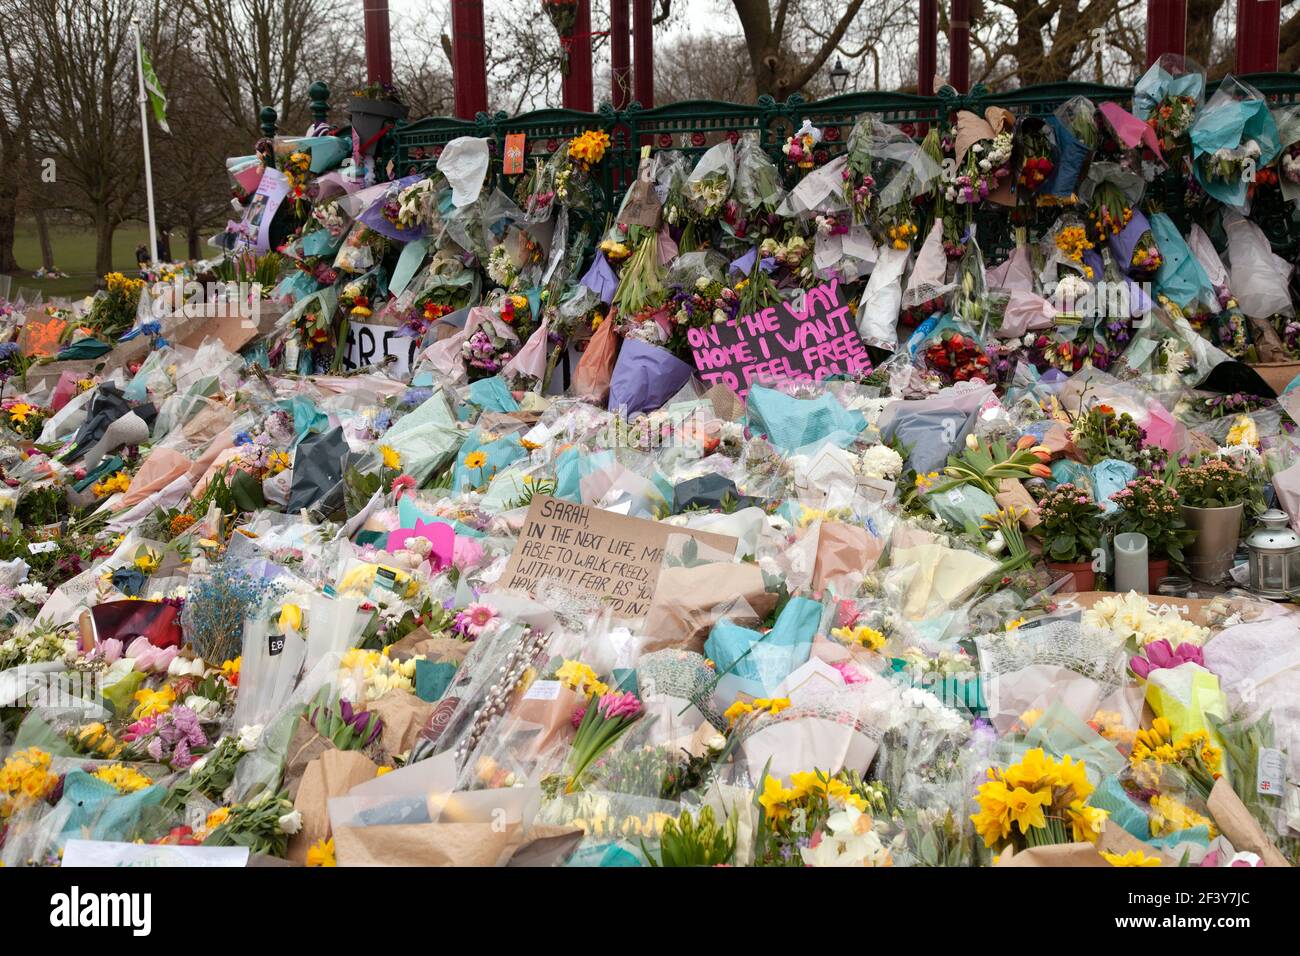 Sign and Flowers in Memory of Sarah Everard on Clapham Common, London UK Stock Photo